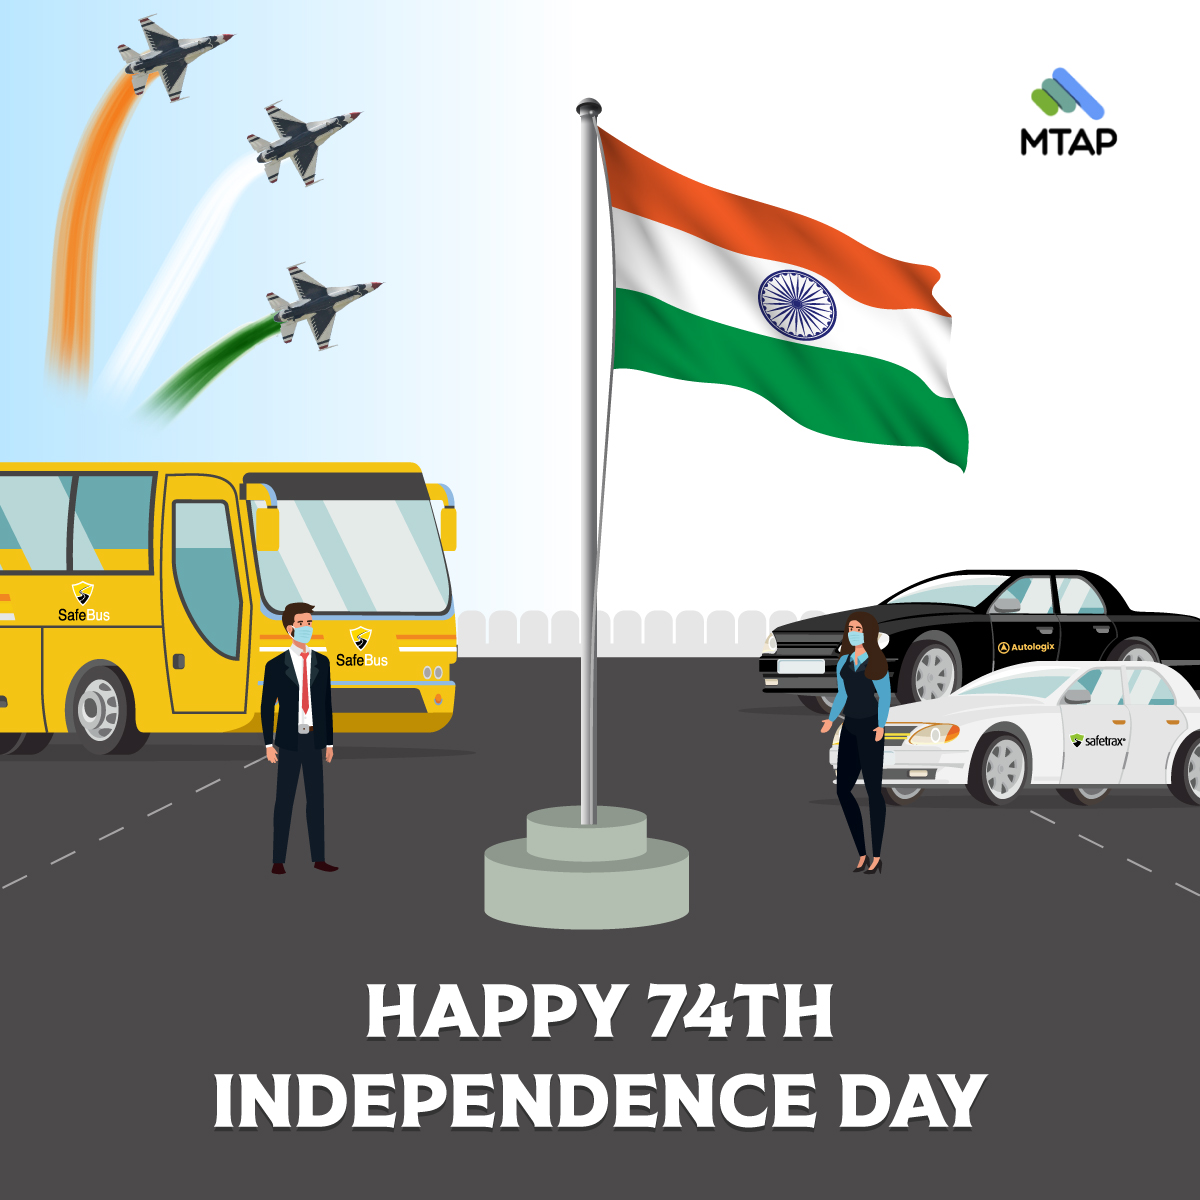 Team #safetrax wishes you all a #HappyIndependenceDay.

#transportautomation #employeesafety #safebus #autologix #mtap